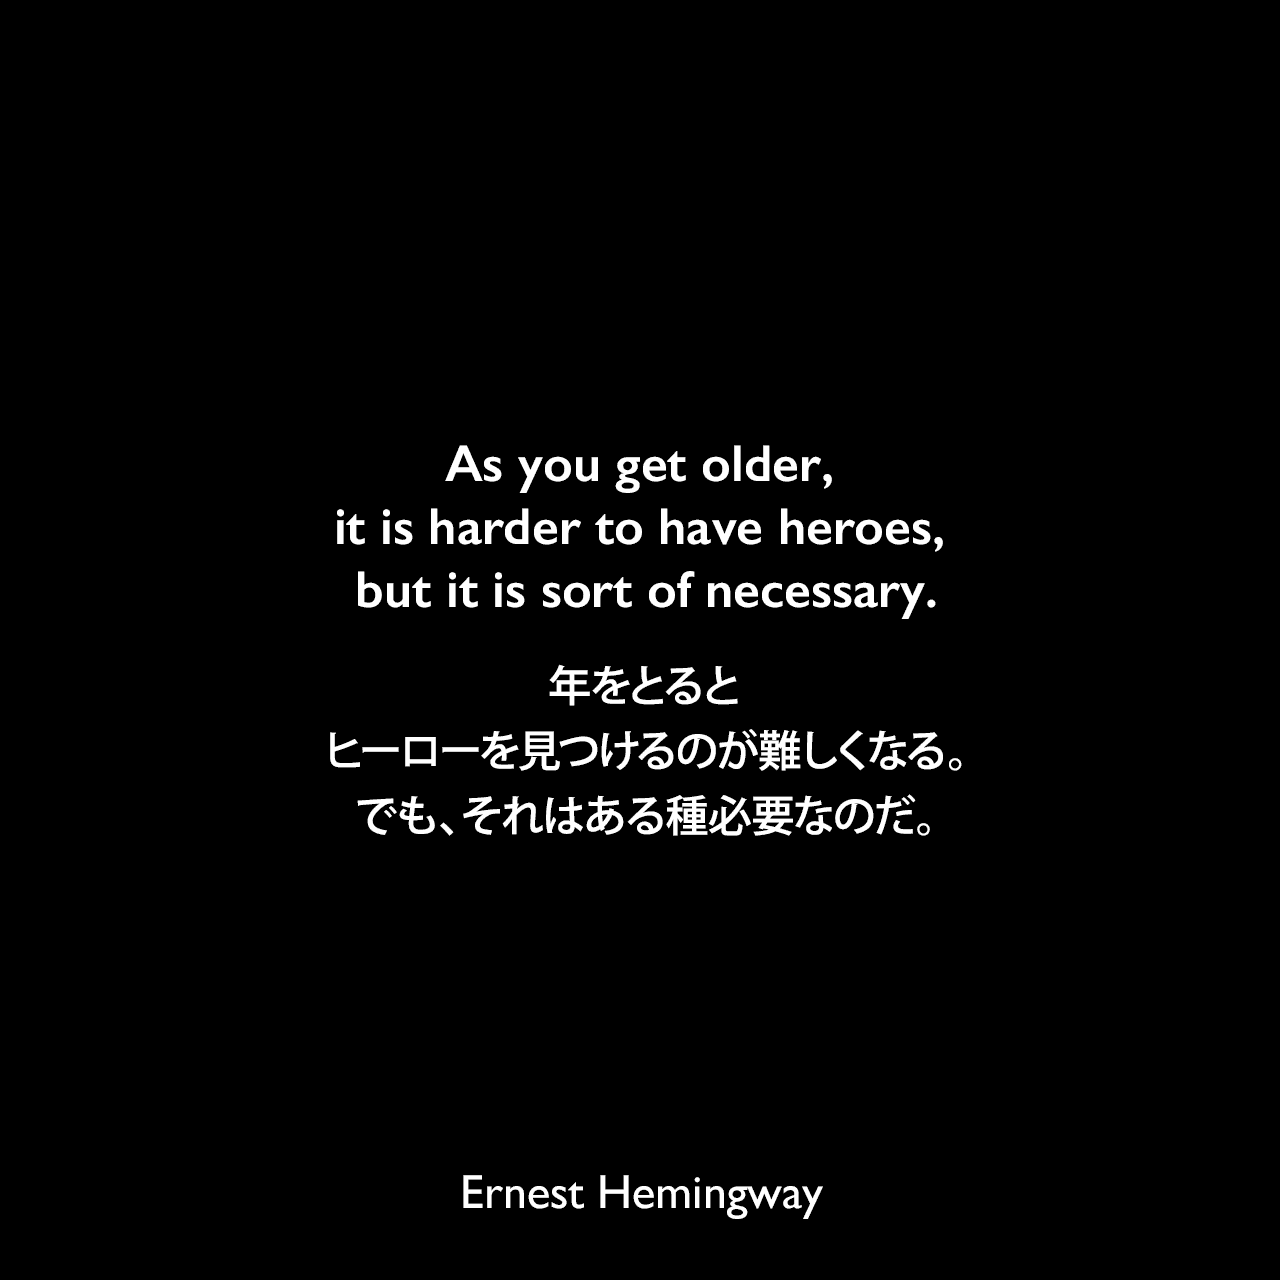 As you get older, it is harder to have heroes, but it is sort of necessary.年をとると、ヒーローを見つけるのが難しくなる。でも、それはある種必要なのだ。Ernest Hemingway